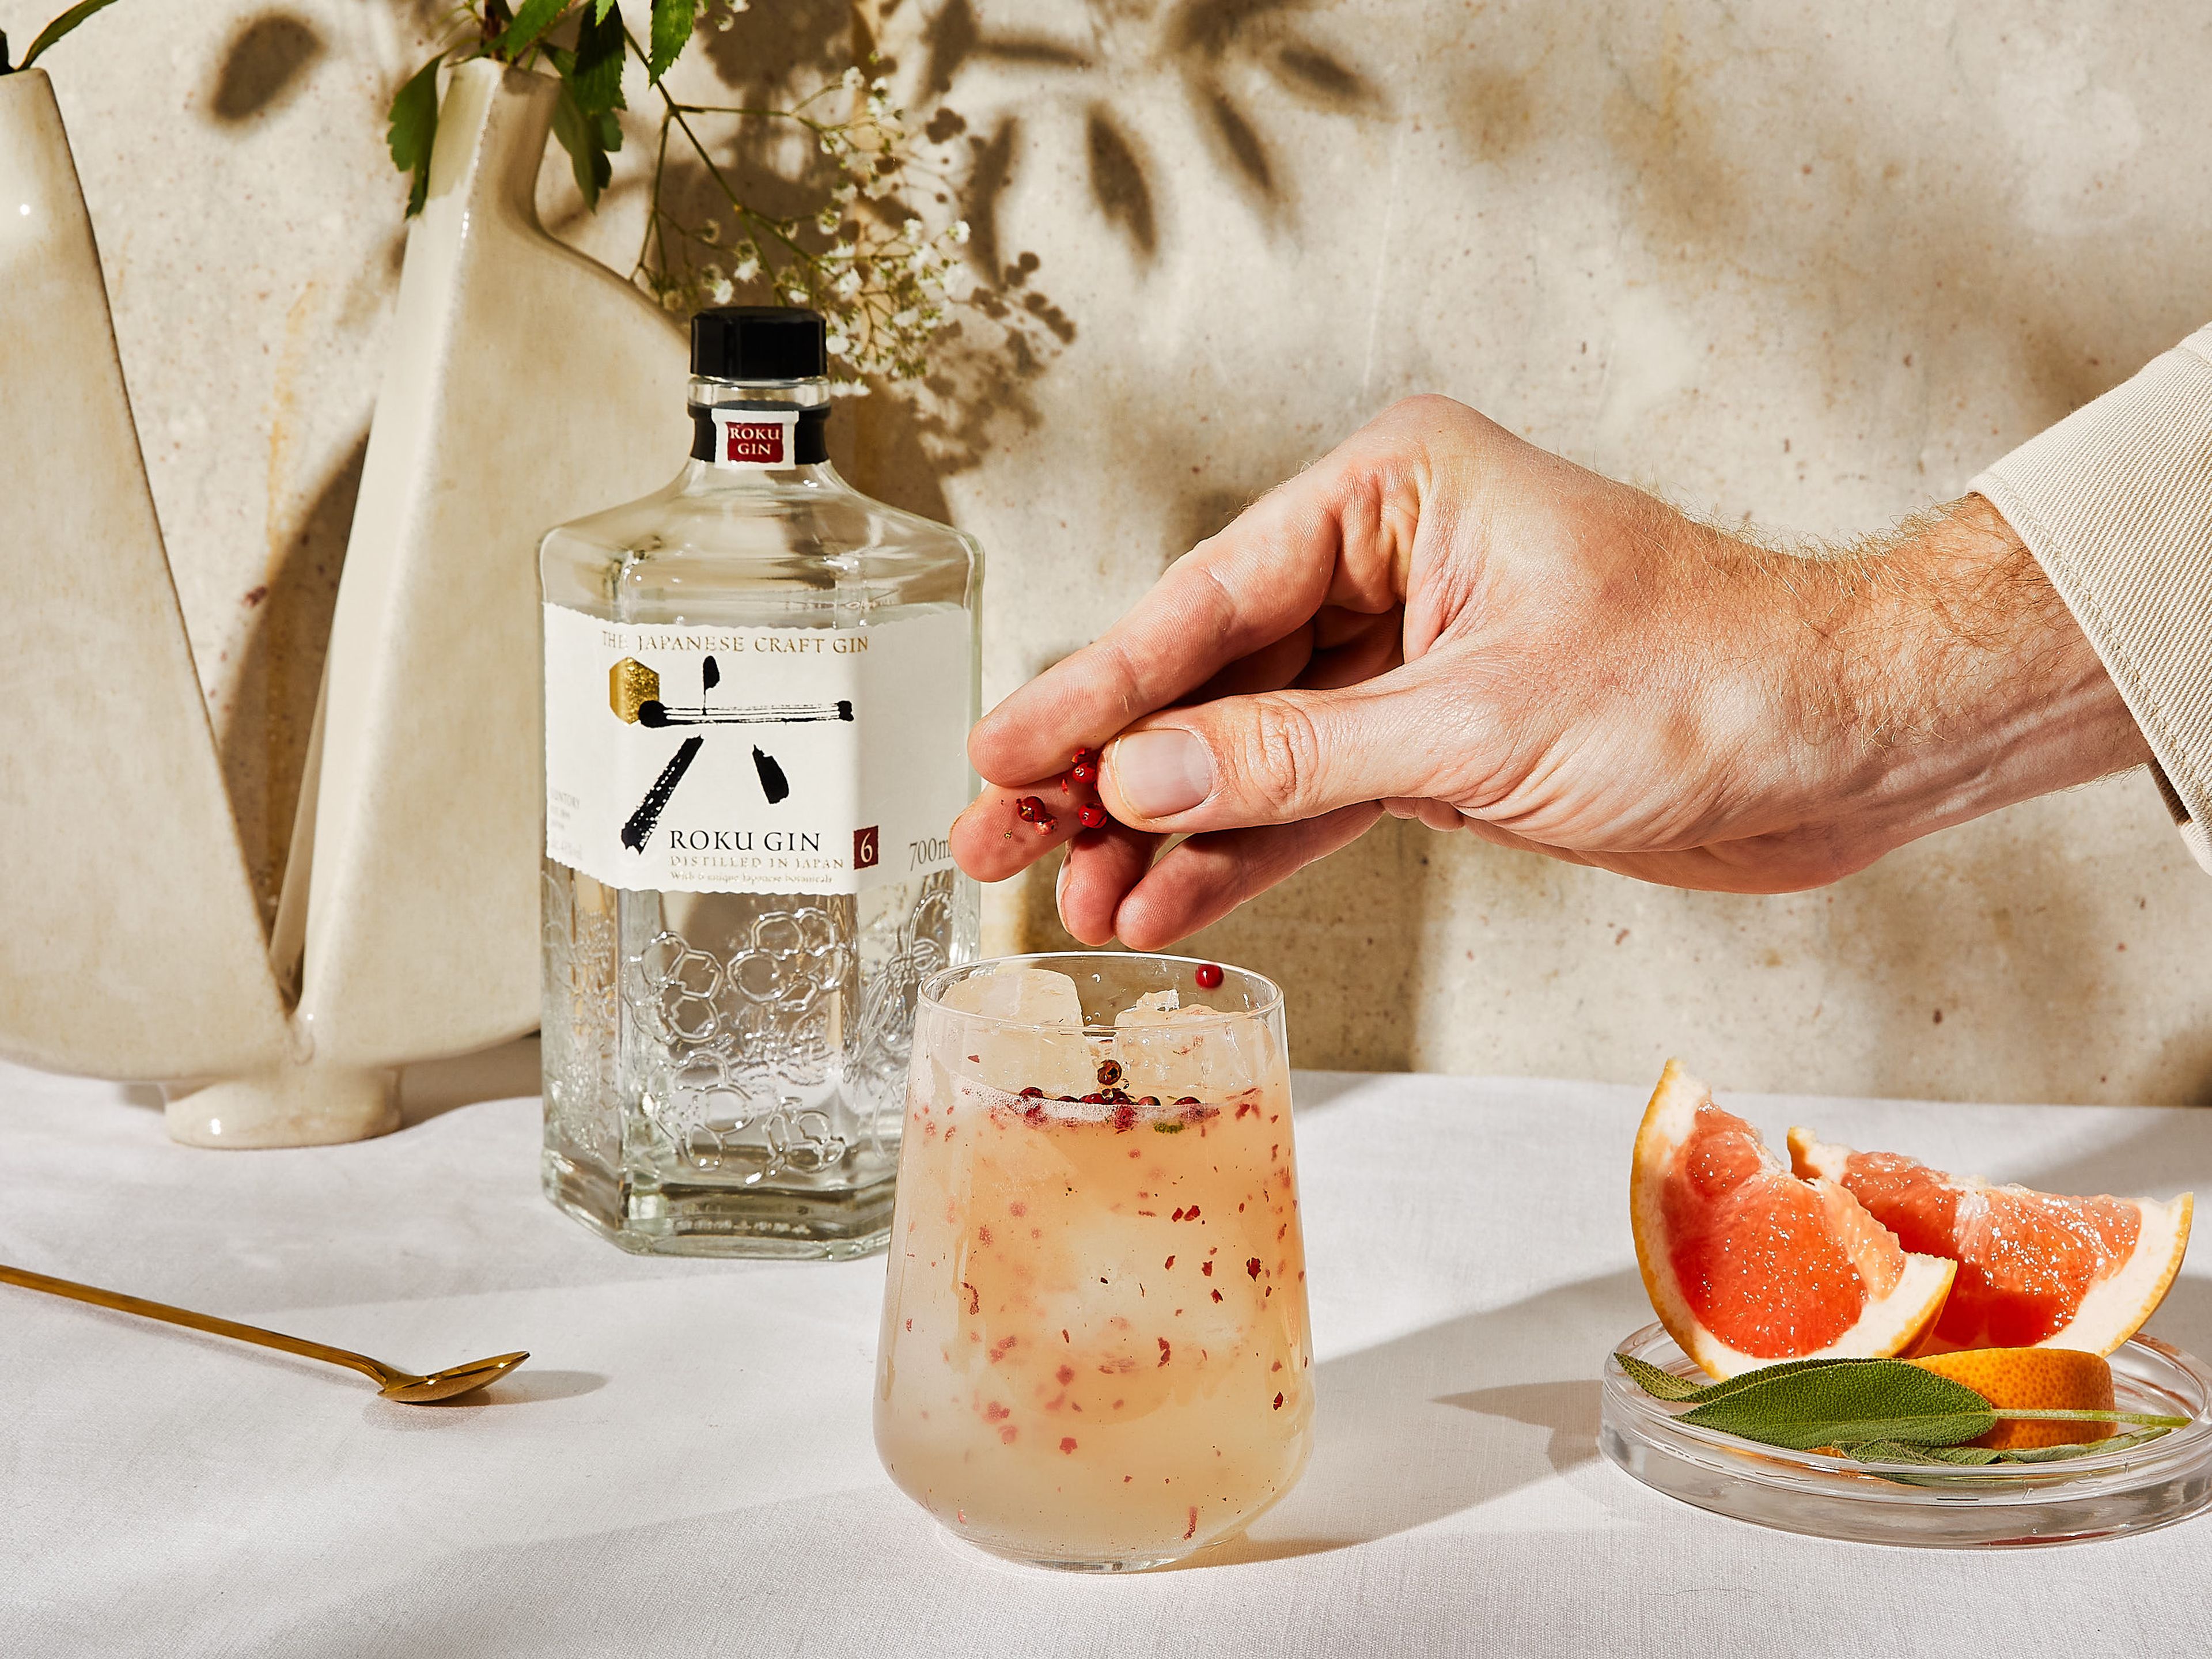 Garnish with a slice of grapefruit, pink peppercorns and sage.